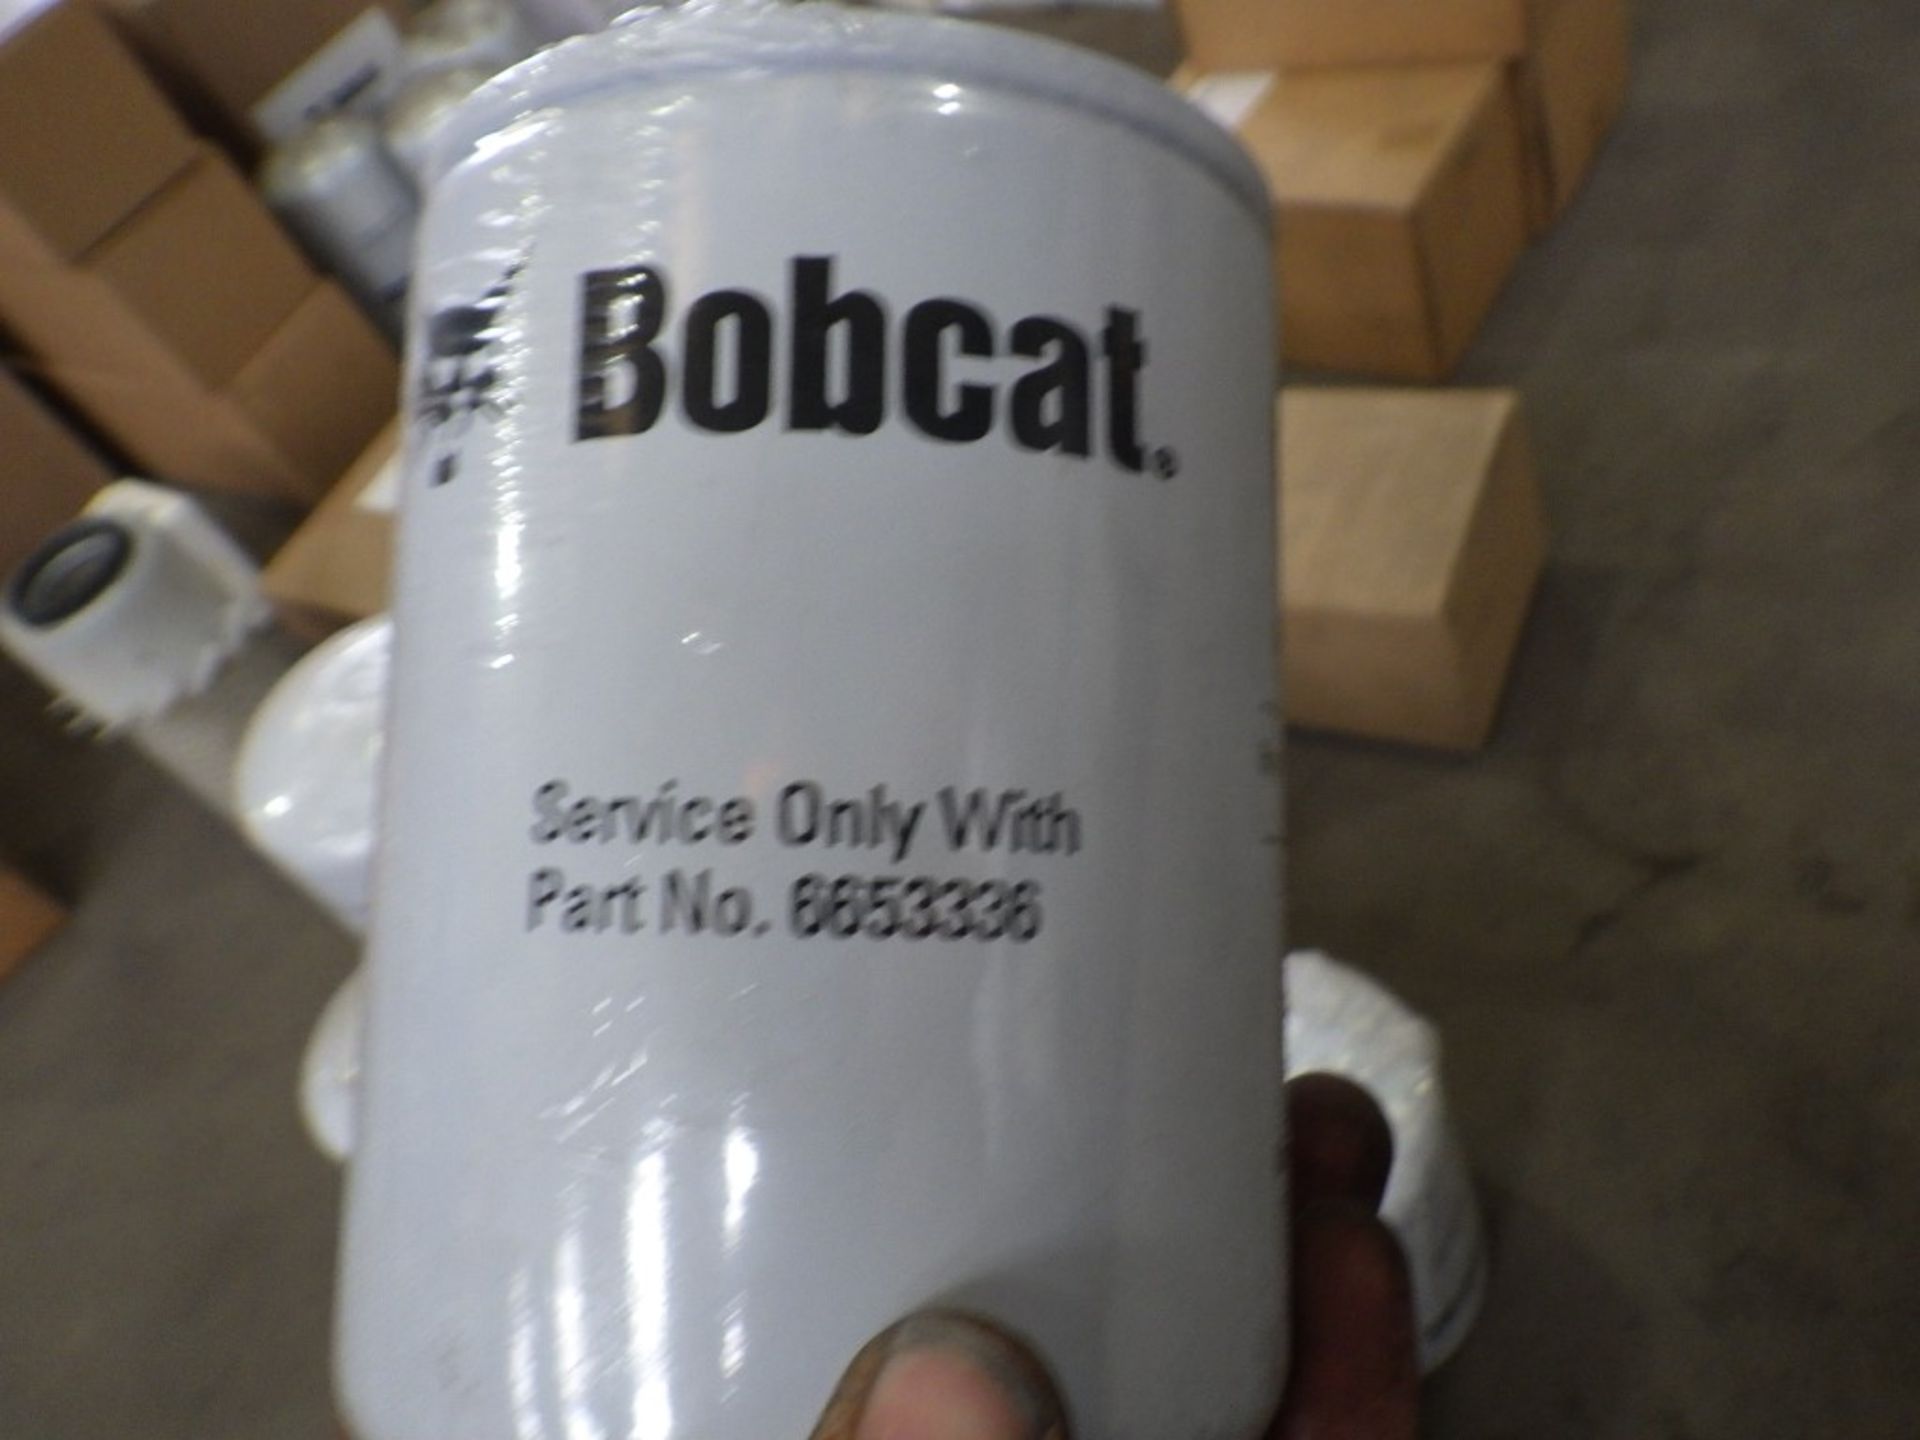 ASSORTED BOBCAT FILTERS & FILTER KITS INCL. P/N: 6987575 6900611, 6987751 (3 OF), 6901188, - Image 15 of 22